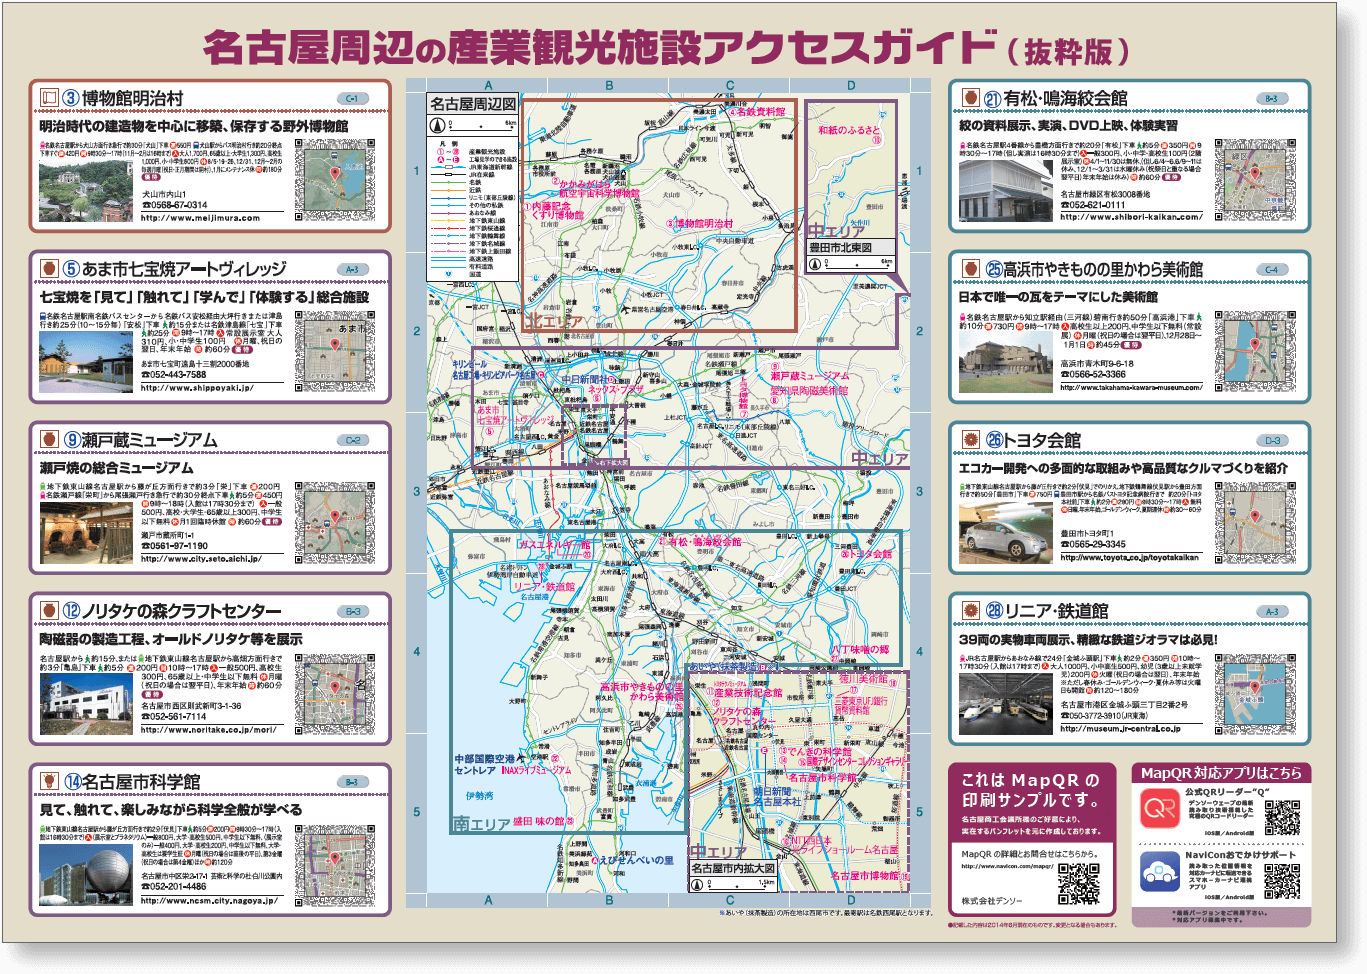 Access guidance to industrial tourist facilities around Nagoya